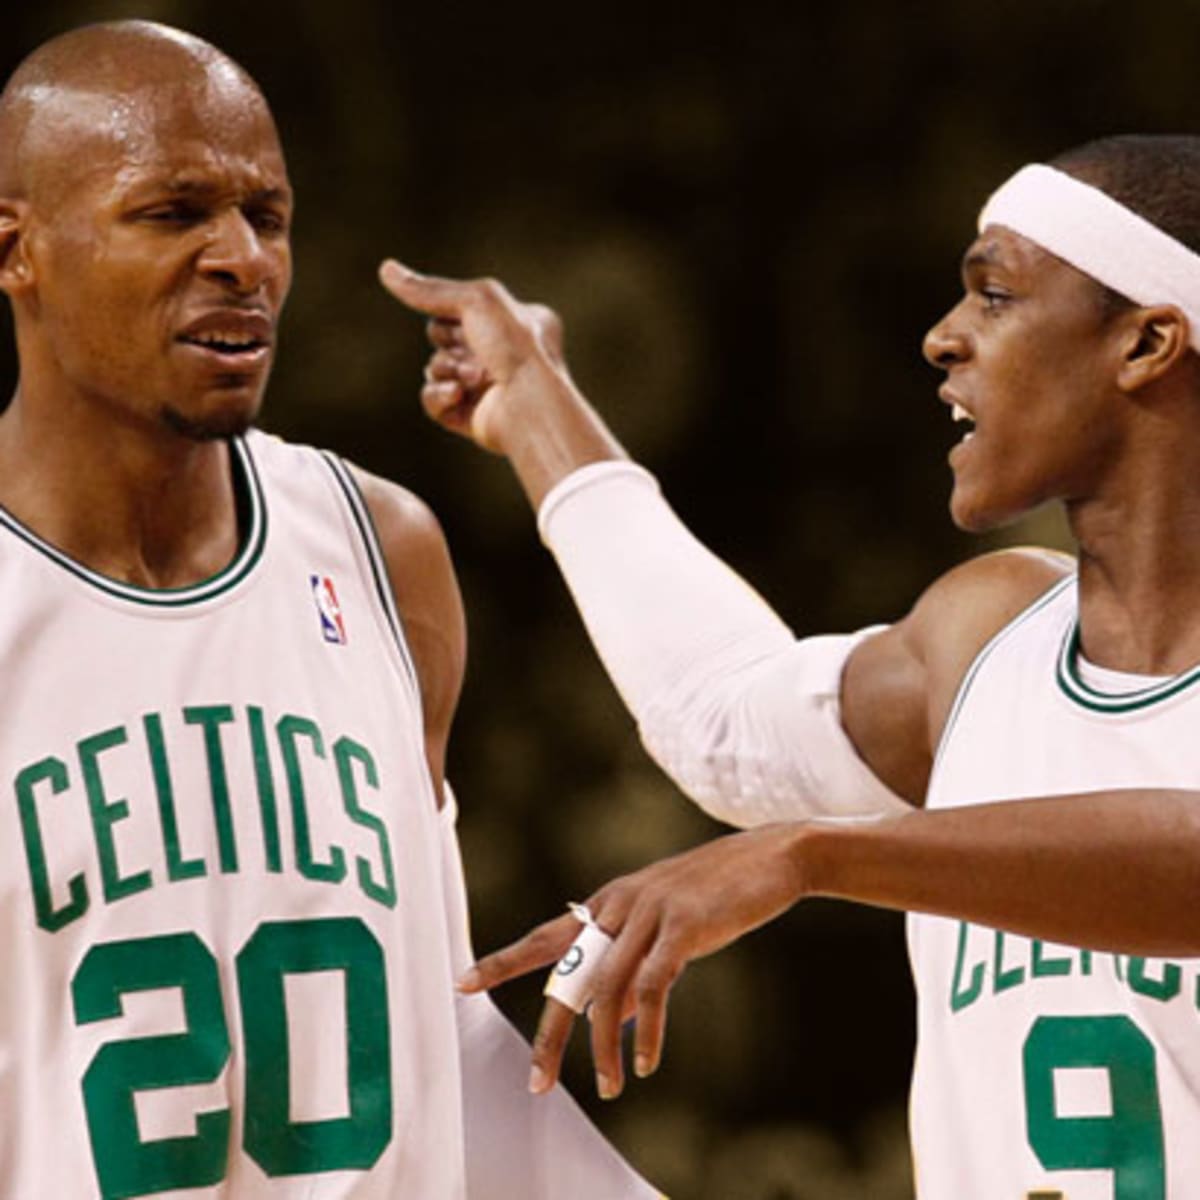 Rajon Rondo is planning a reunion for the 2008 NBA champion